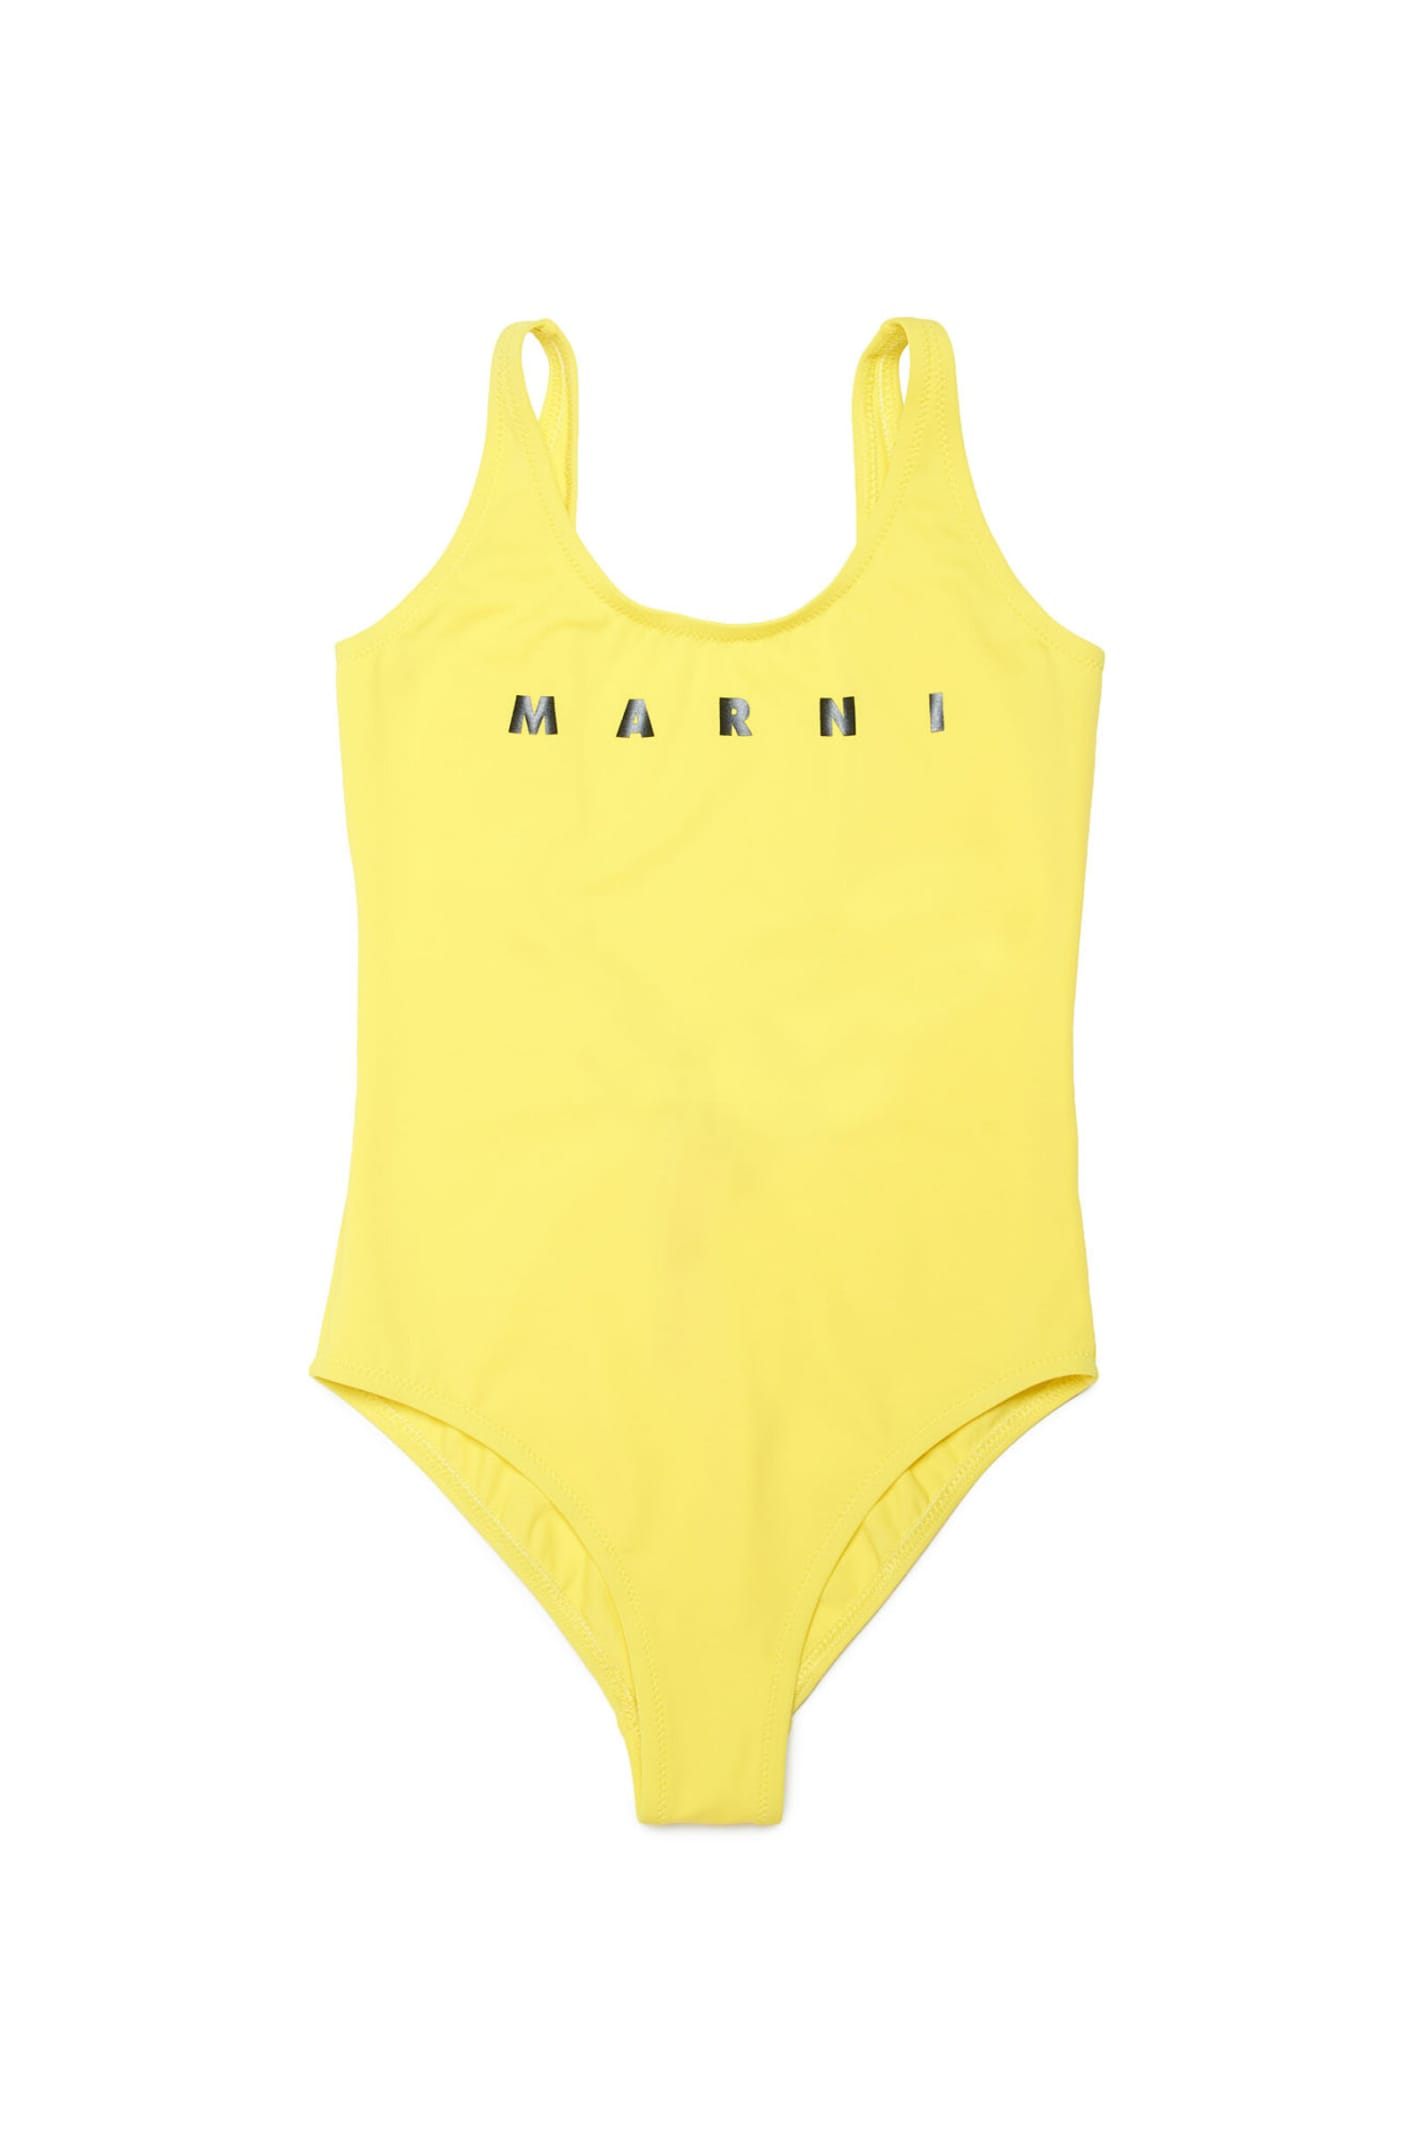 MARNI MM9F SWIMSUIT MARNI YELLOW ONE-PIECE SWIMMING COSTUME IN LYCRA WITH LOGO